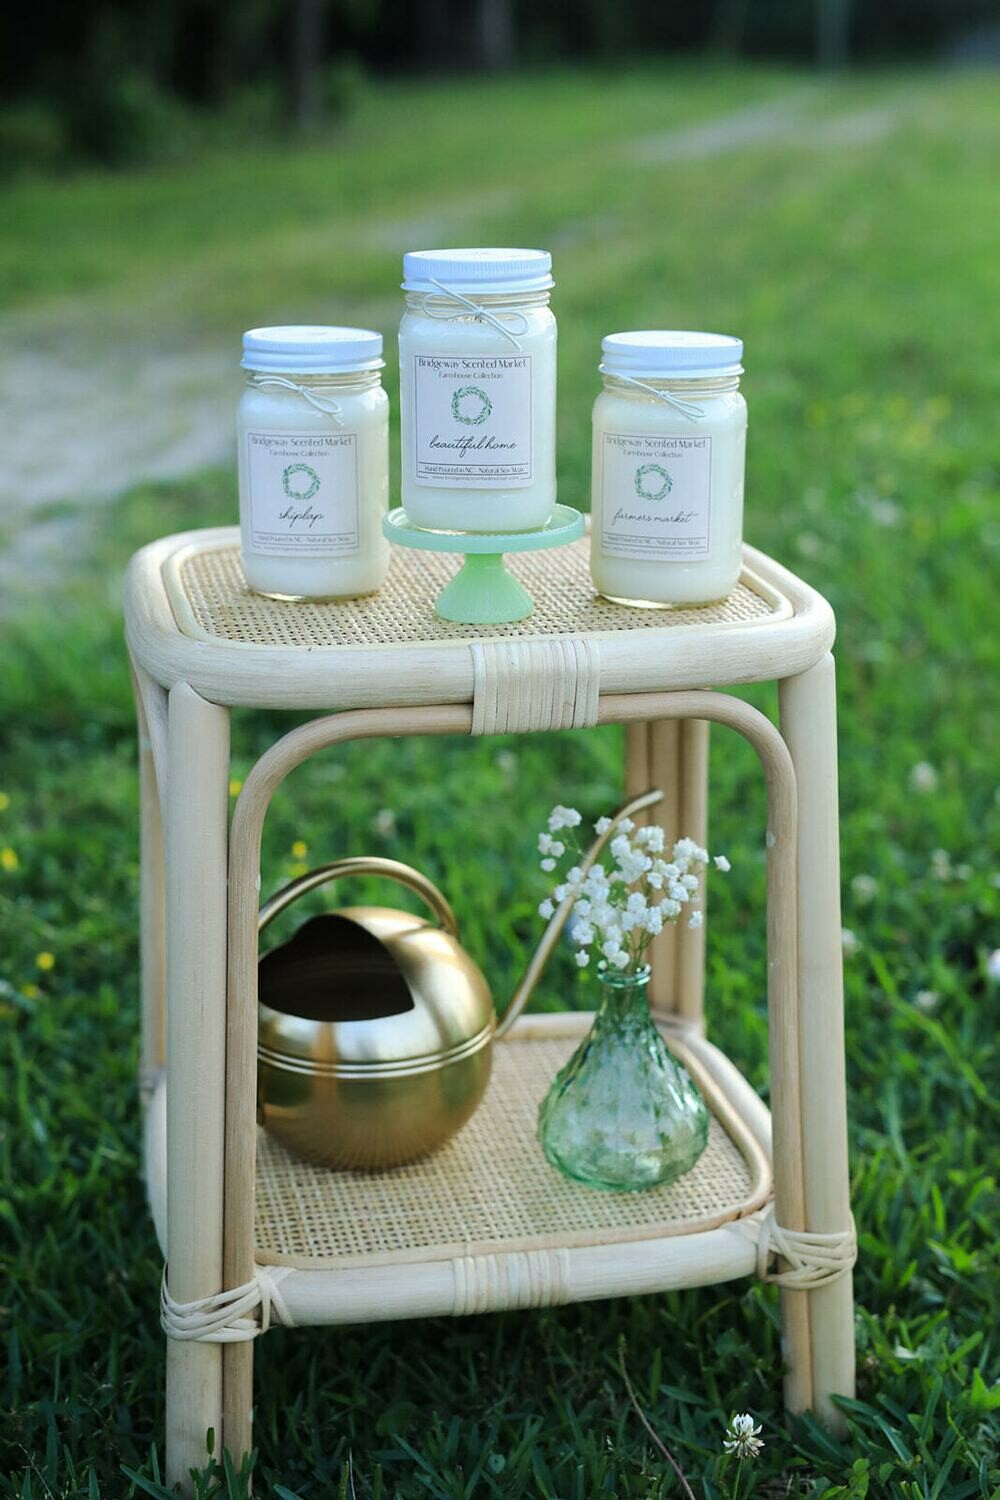 Farmhouse Collection Bundle of 6 Soy Wax Candles - Shipping Included